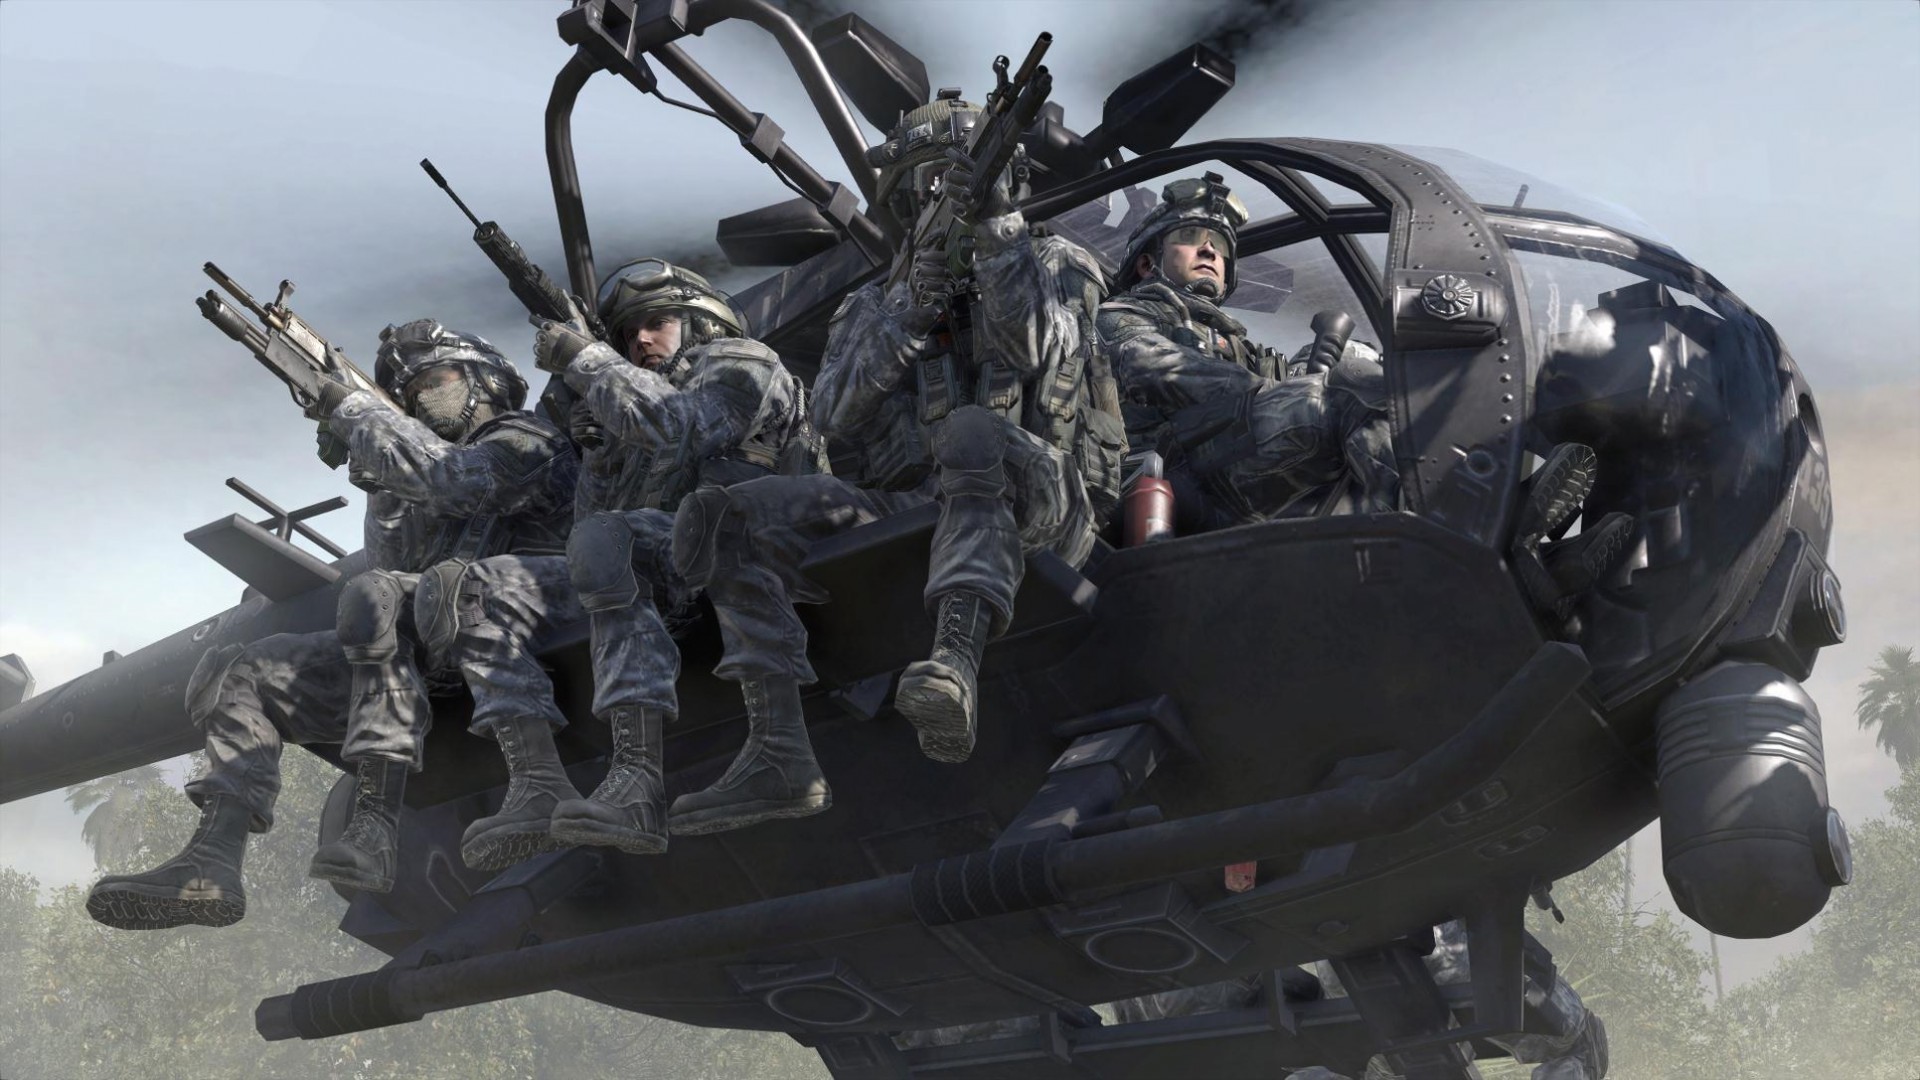 1920x1080 ... Army Ranger Background Army Ranger Wallpaper Backgrounds ...